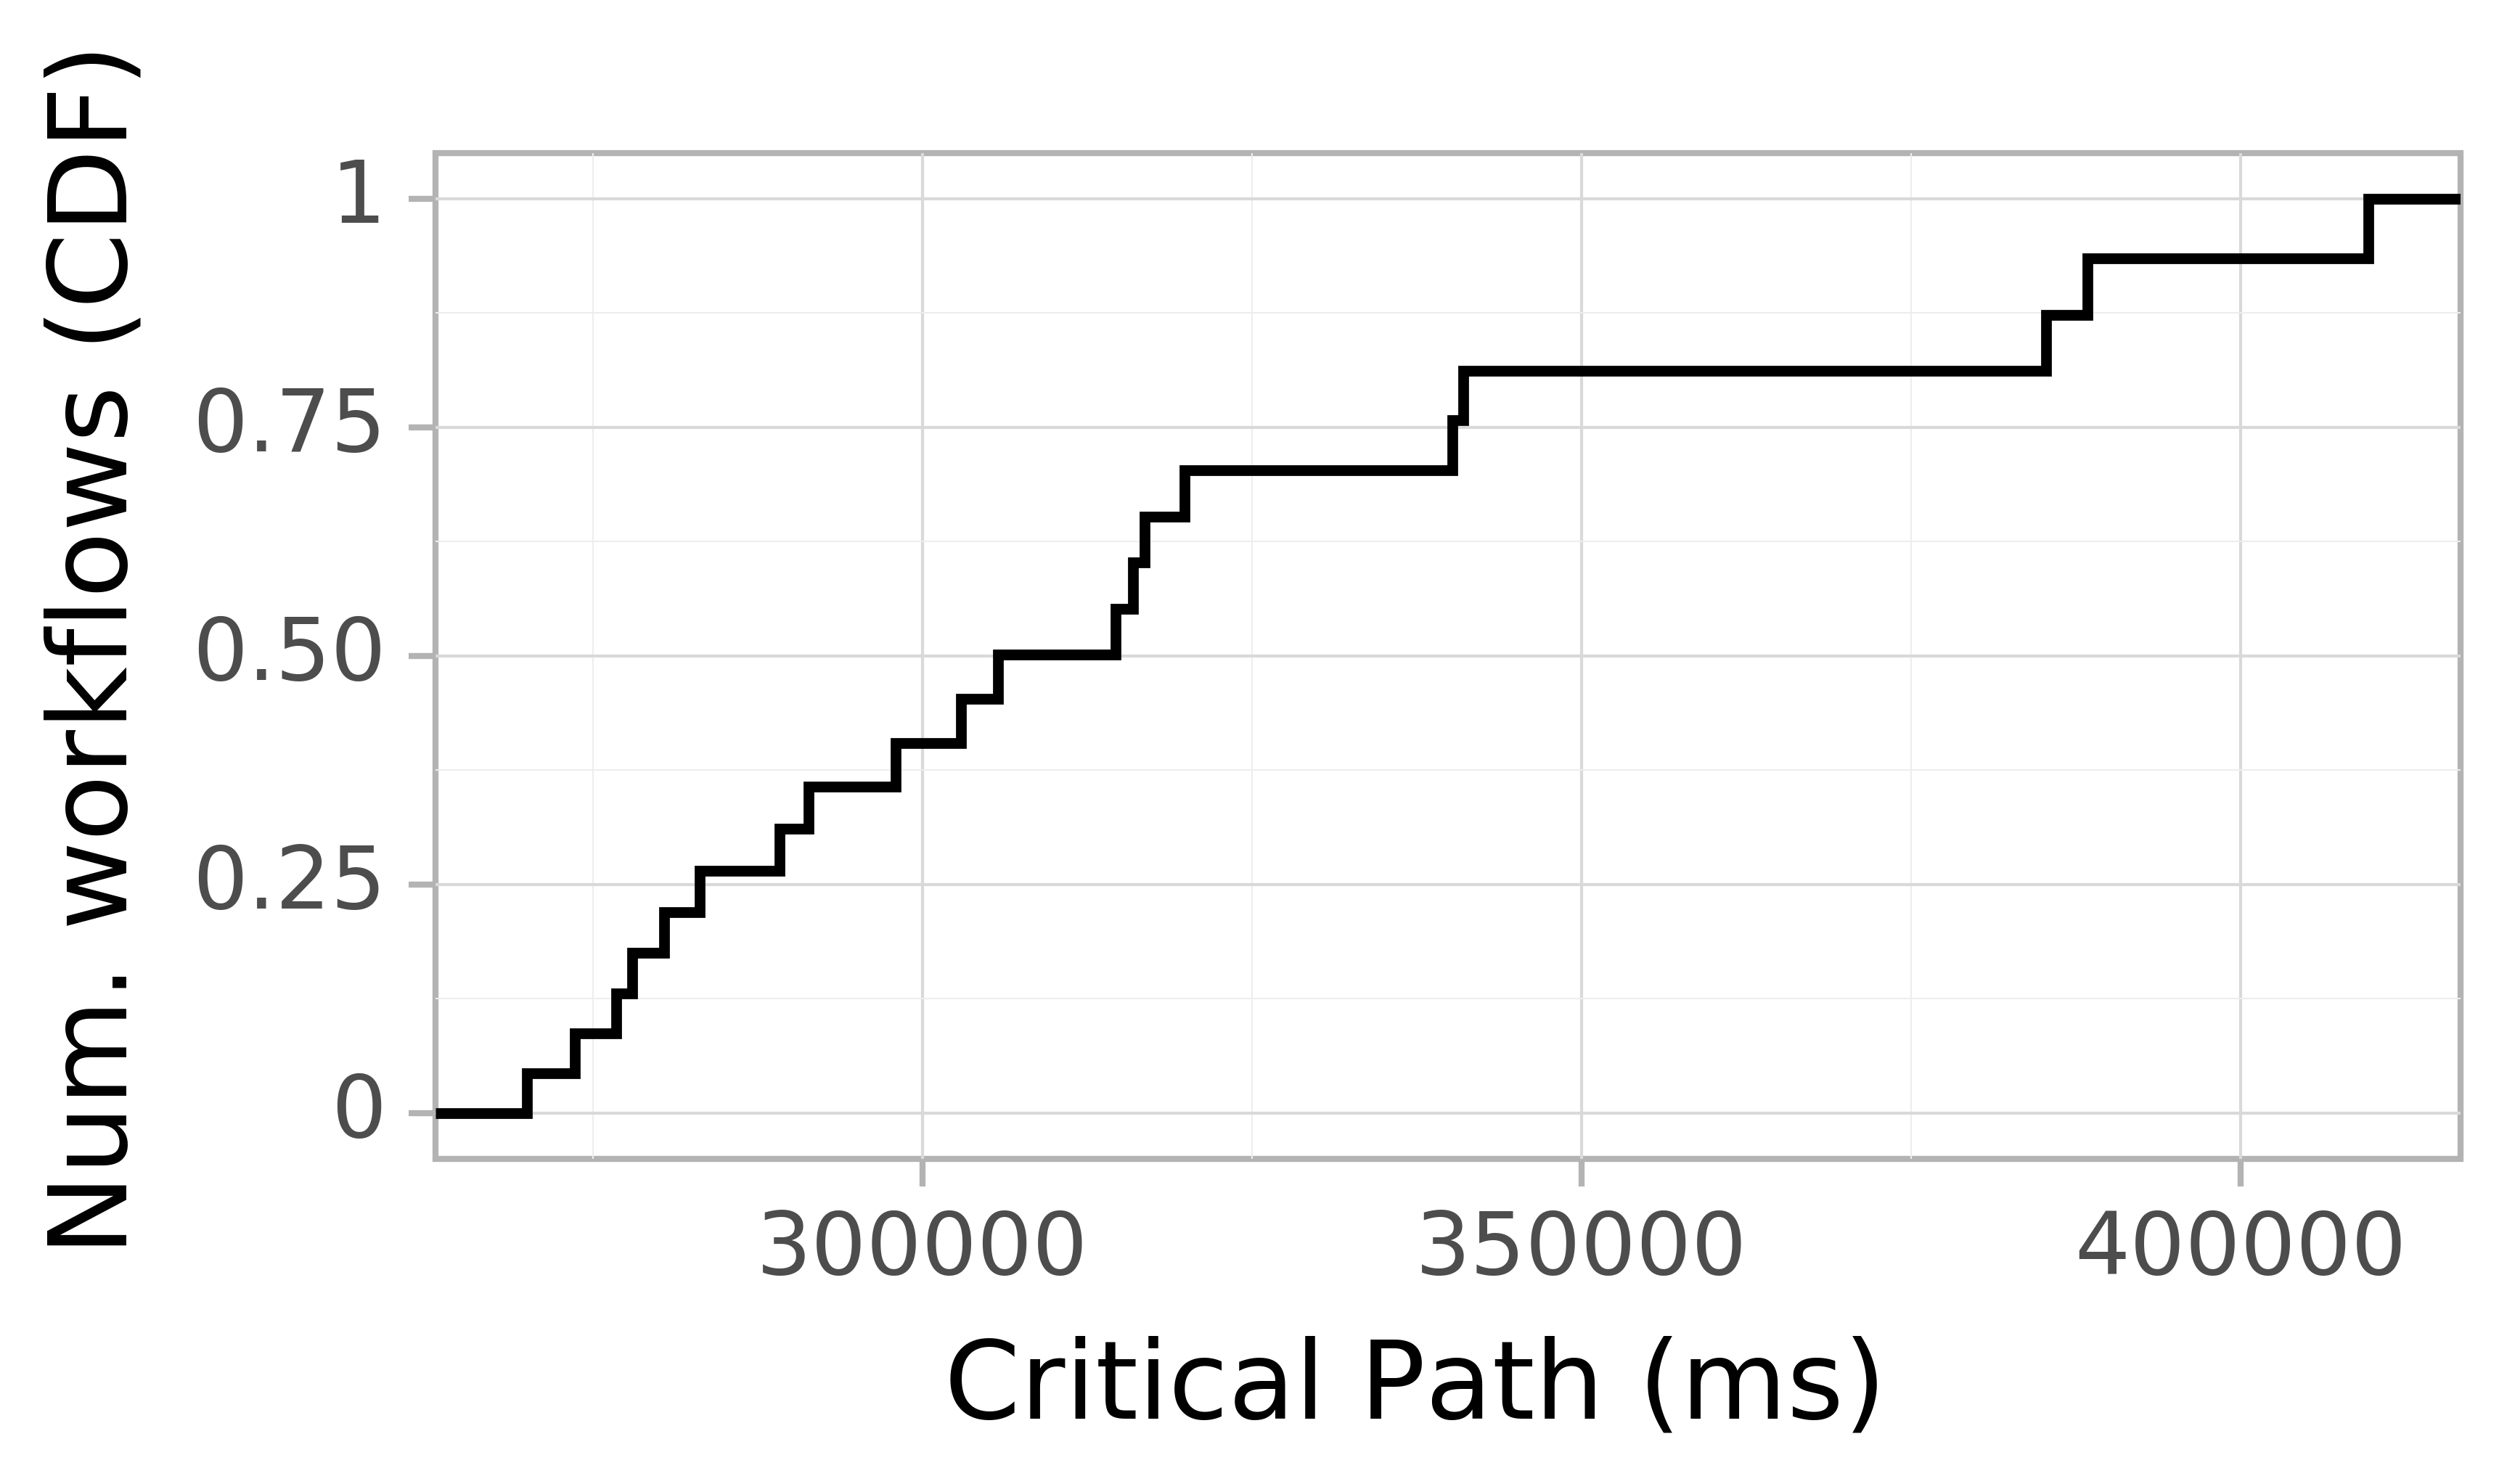 Job runtime CDF graph for the askalon-new_ee30 trace.